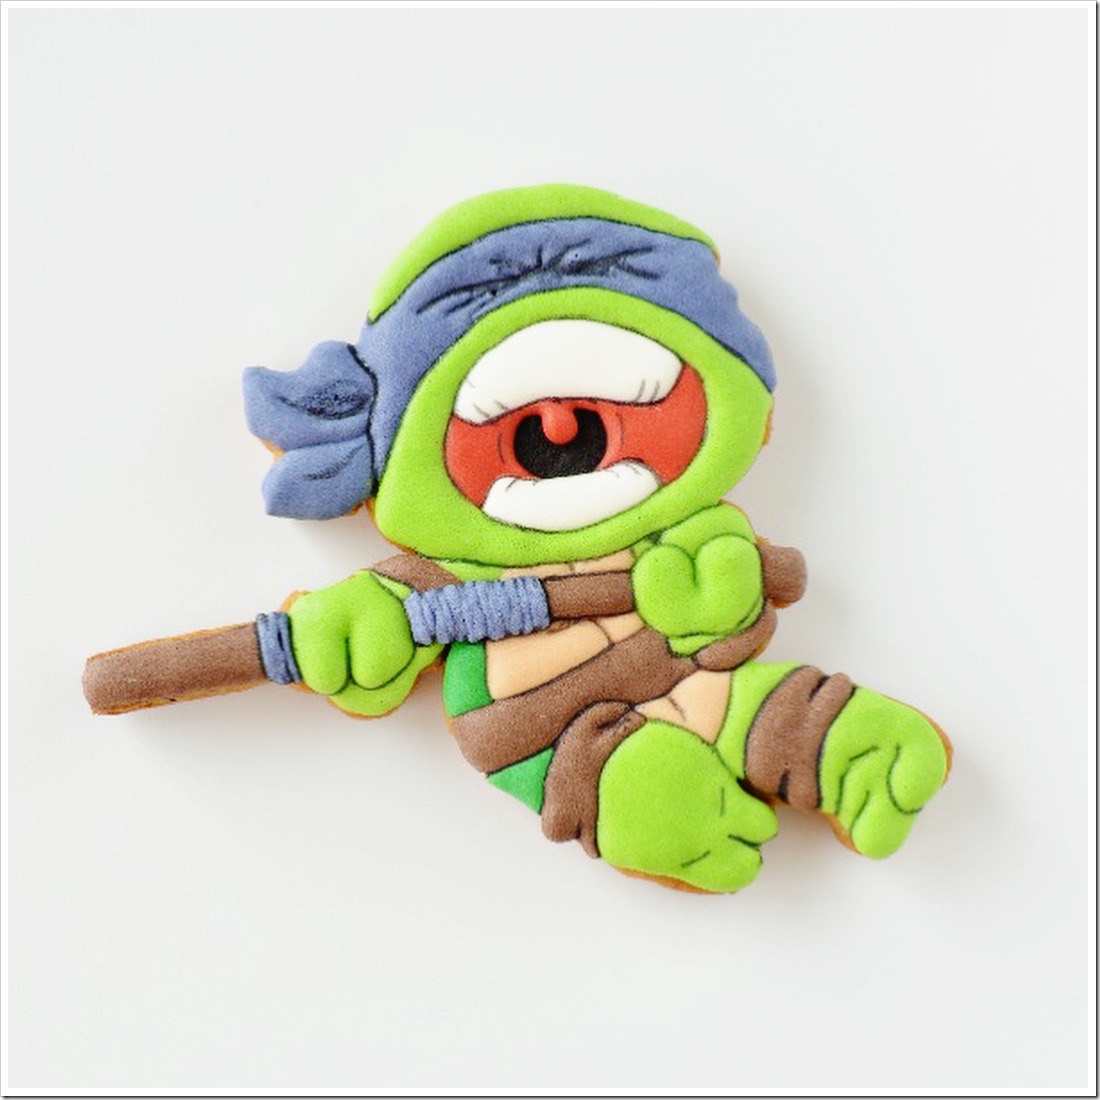 Adorable Baby Donatello Cookie made by Tarta Lenochka #TMNT #Cookie